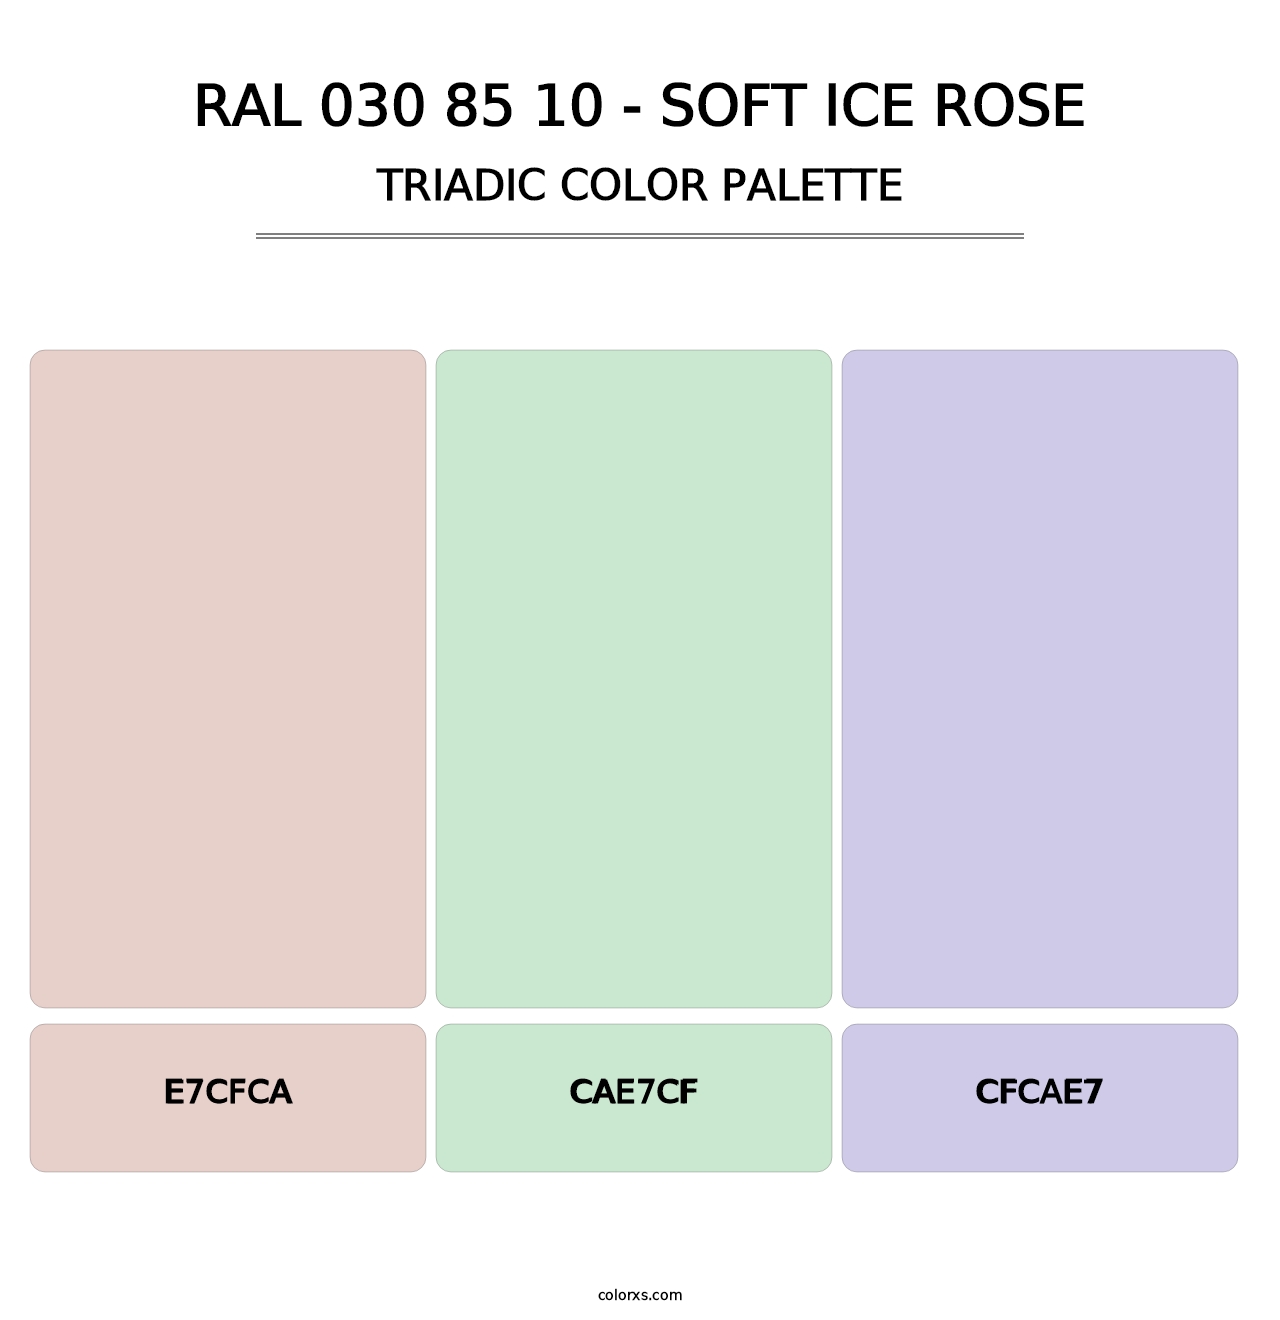 RAL 030 85 10 - Soft Ice Rose - Triadic Color Palette